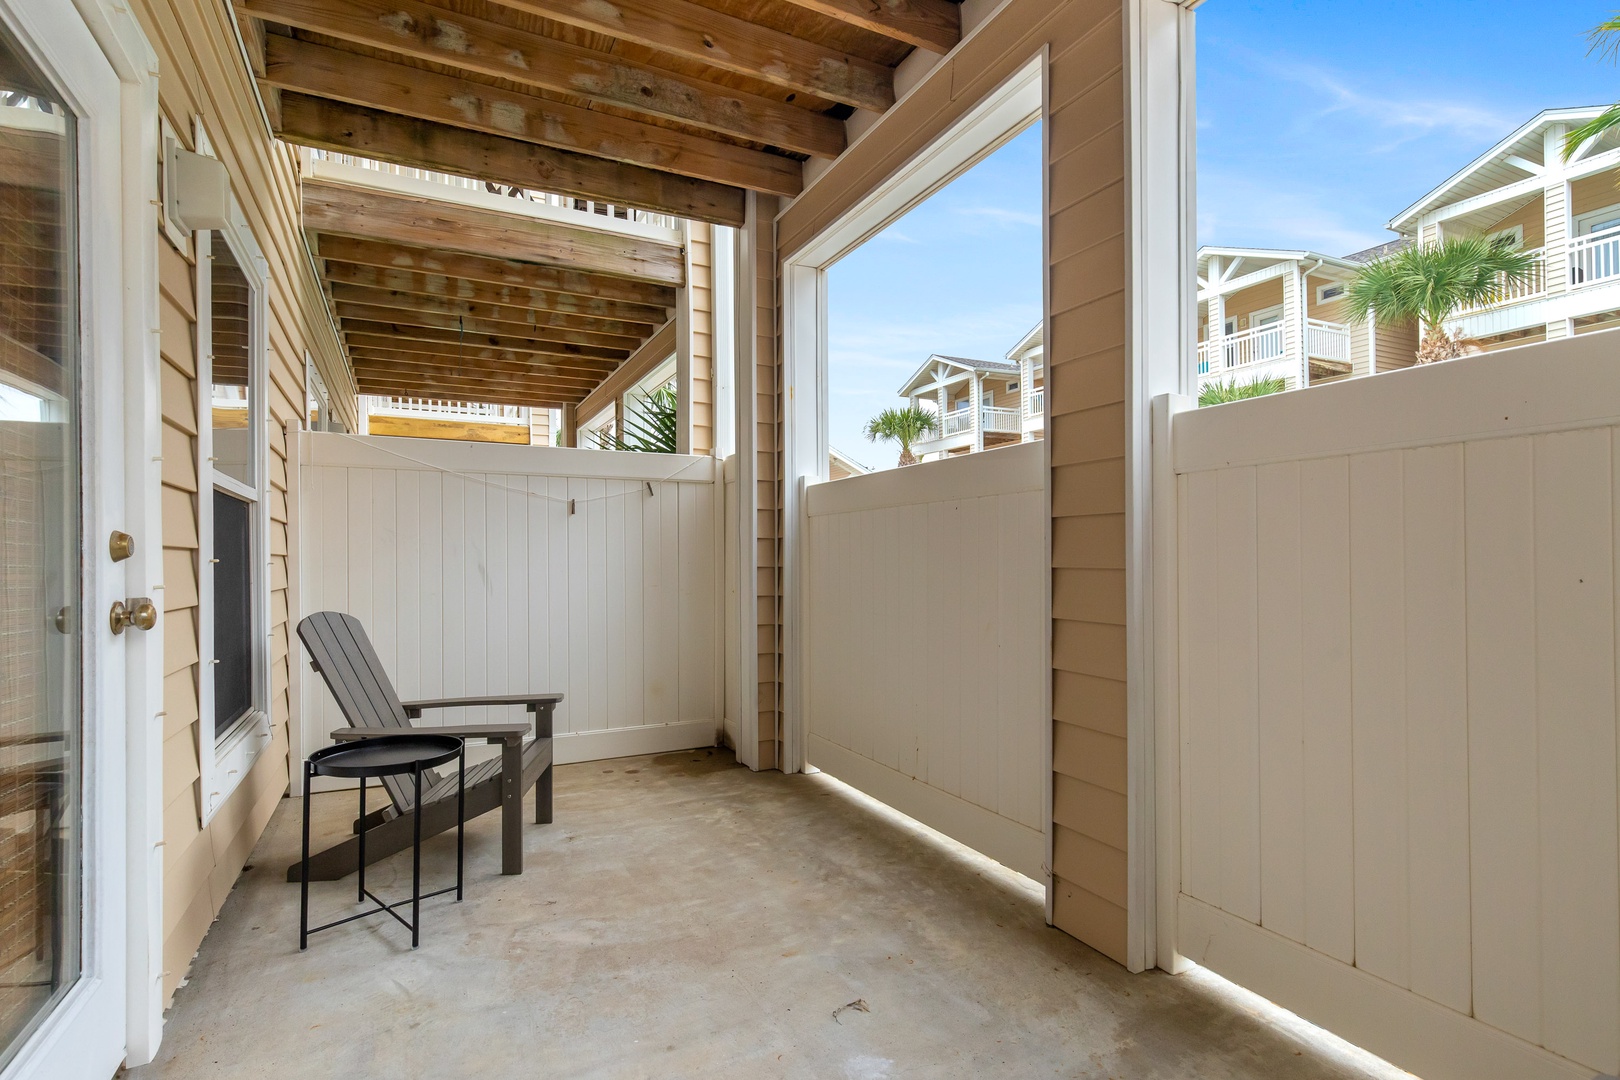 Kick back & relax with privacy on the ground-level patio